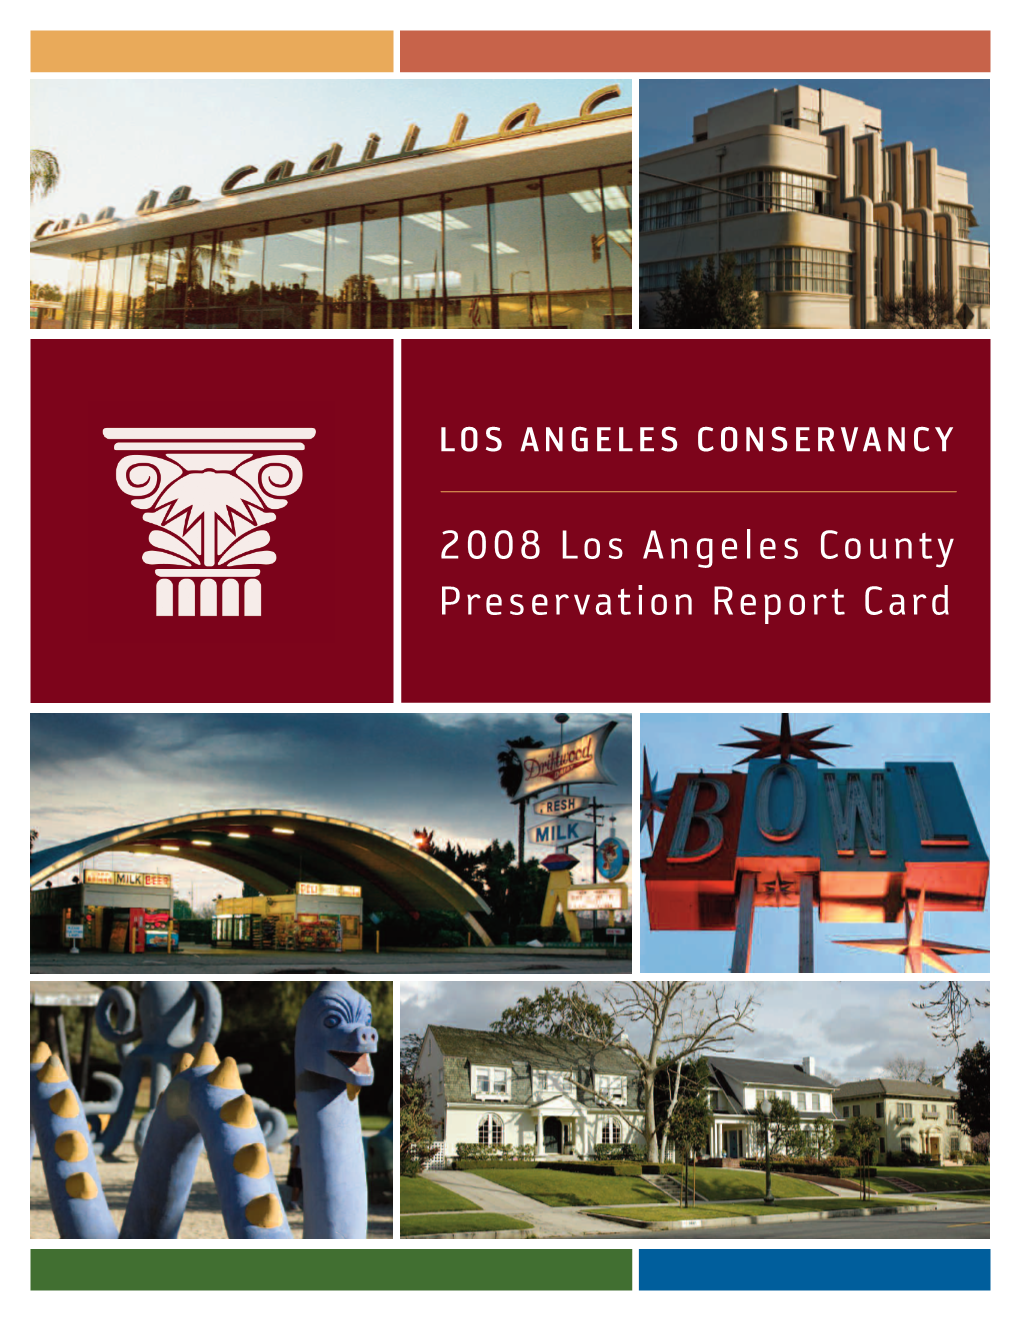 2008 Los Angeles County Preservation Report Card LOS ANGE LE S CONSERVANCY P Re S E R V a T I O N R E P O R T C a Rd | 2 0 0 8